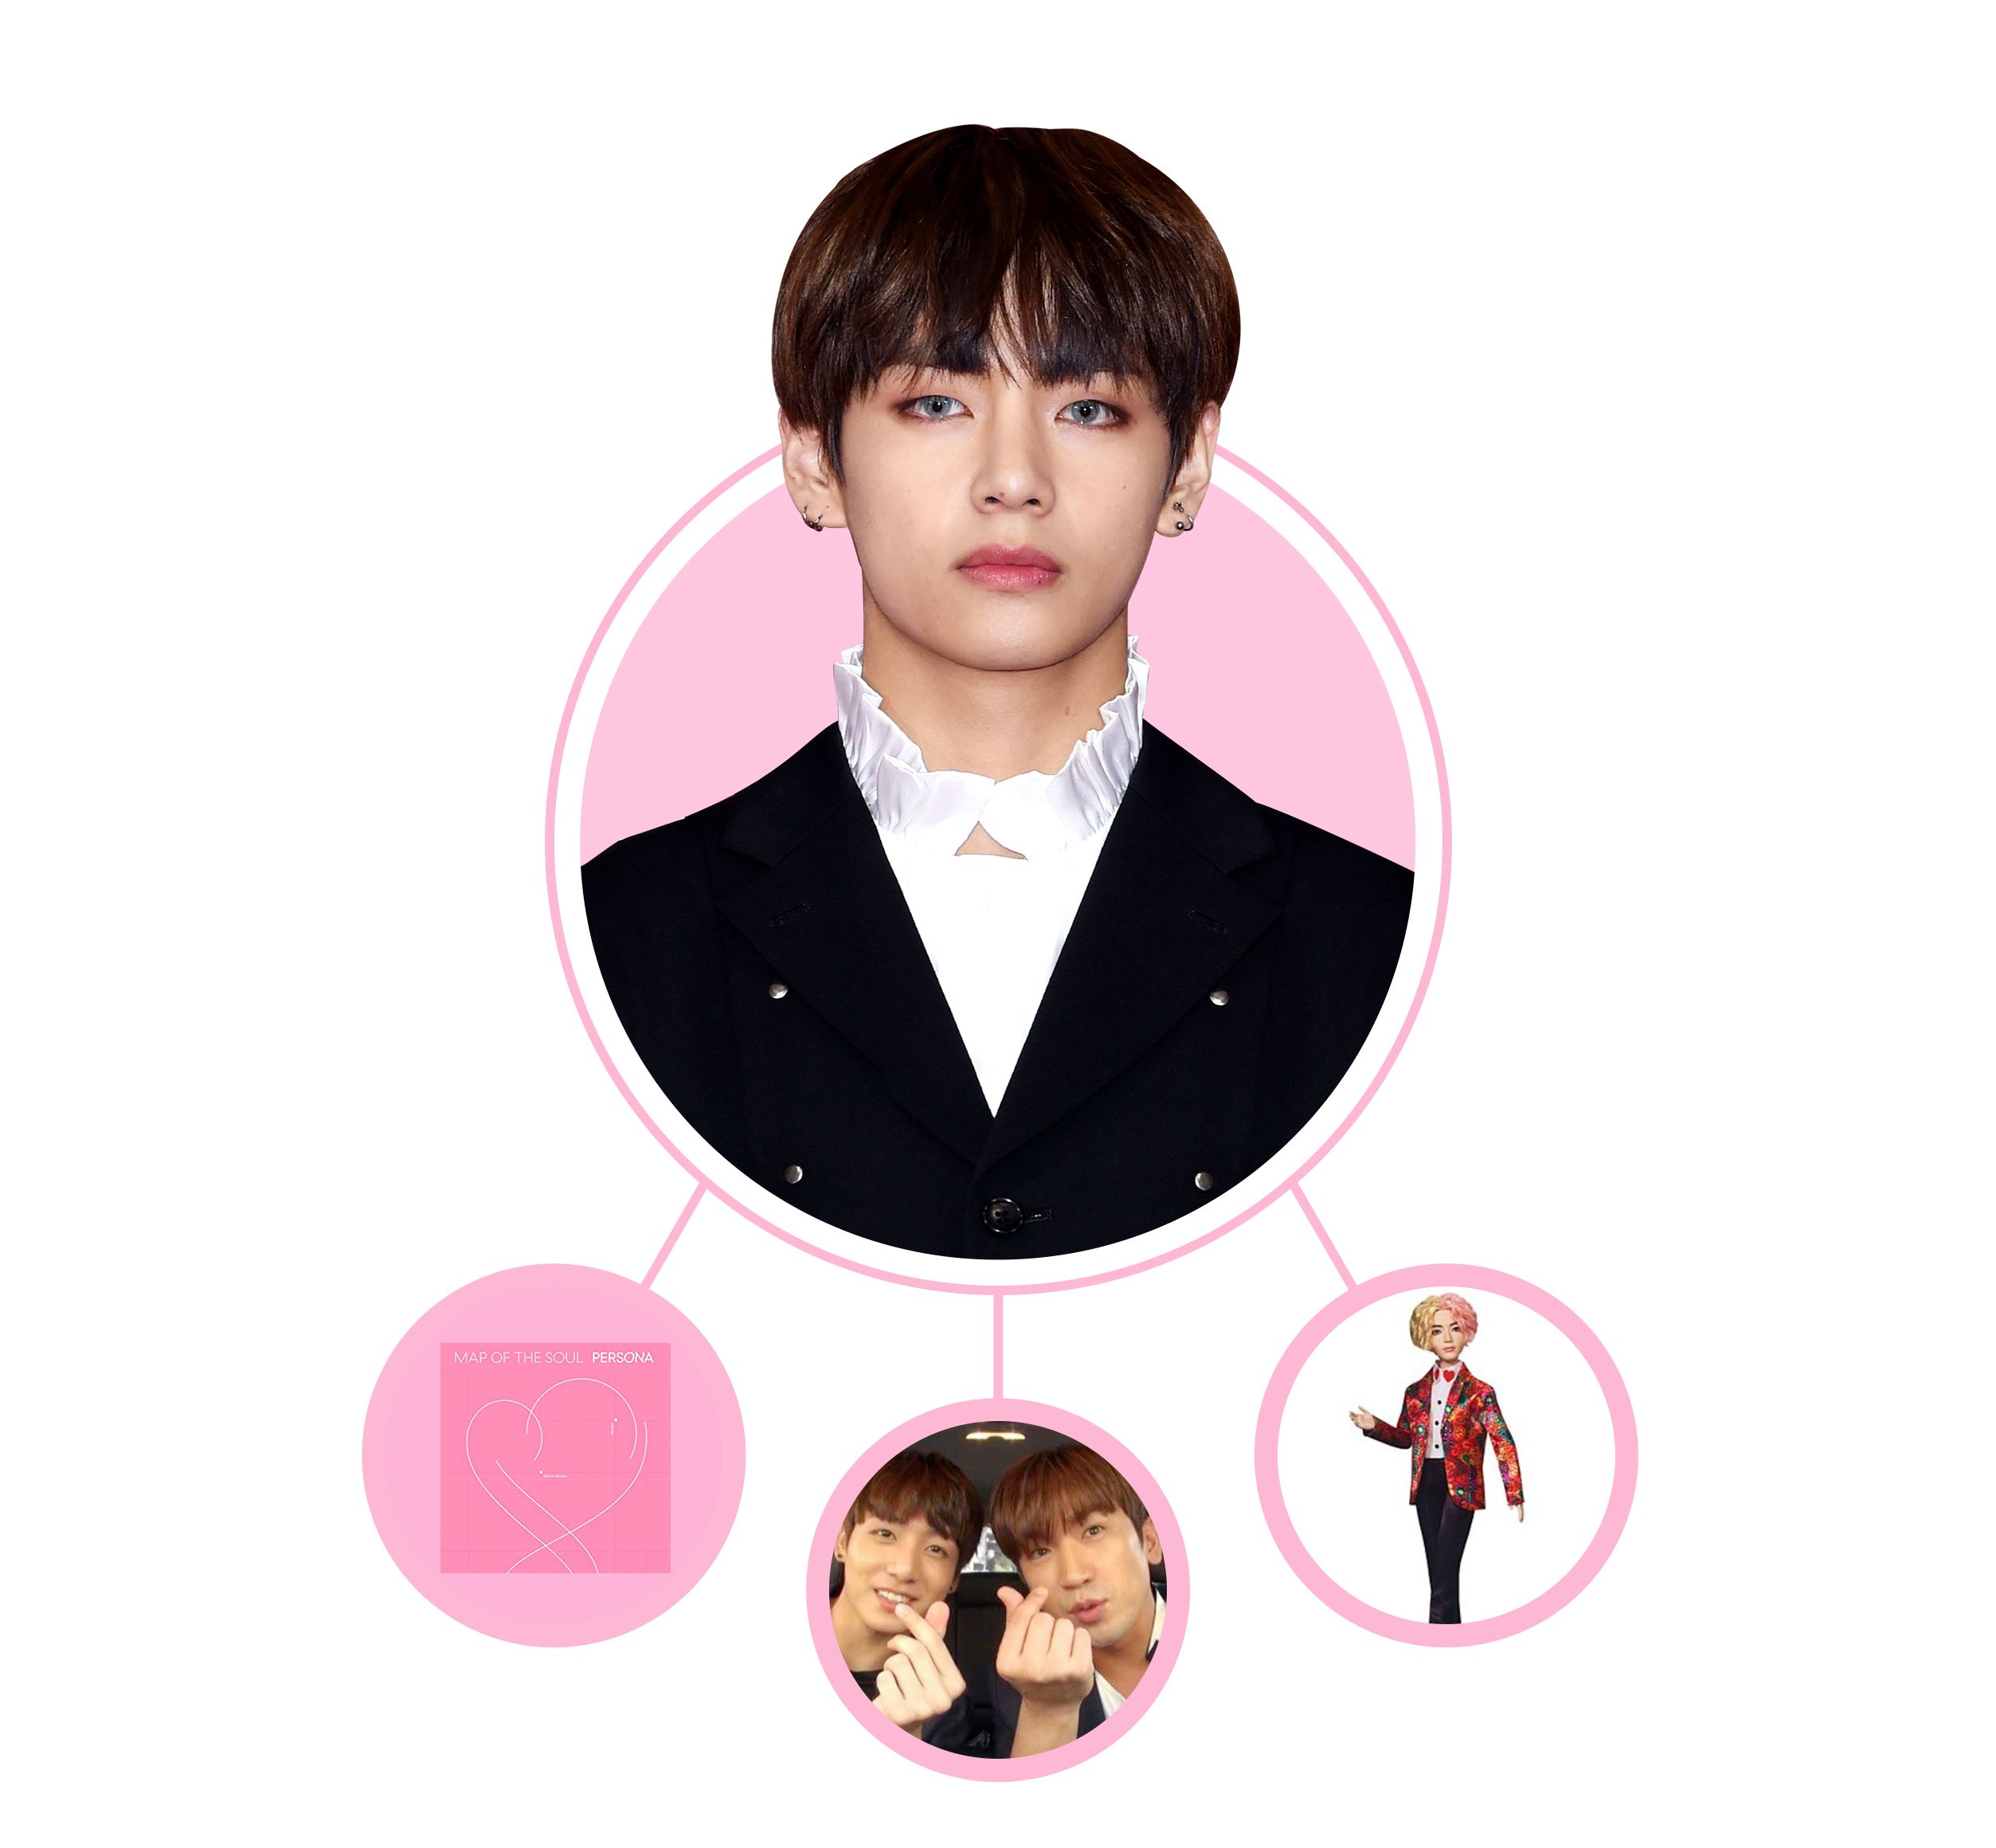 BTS V (aka Kim Taehyung's) net worth, earnings, investments and more